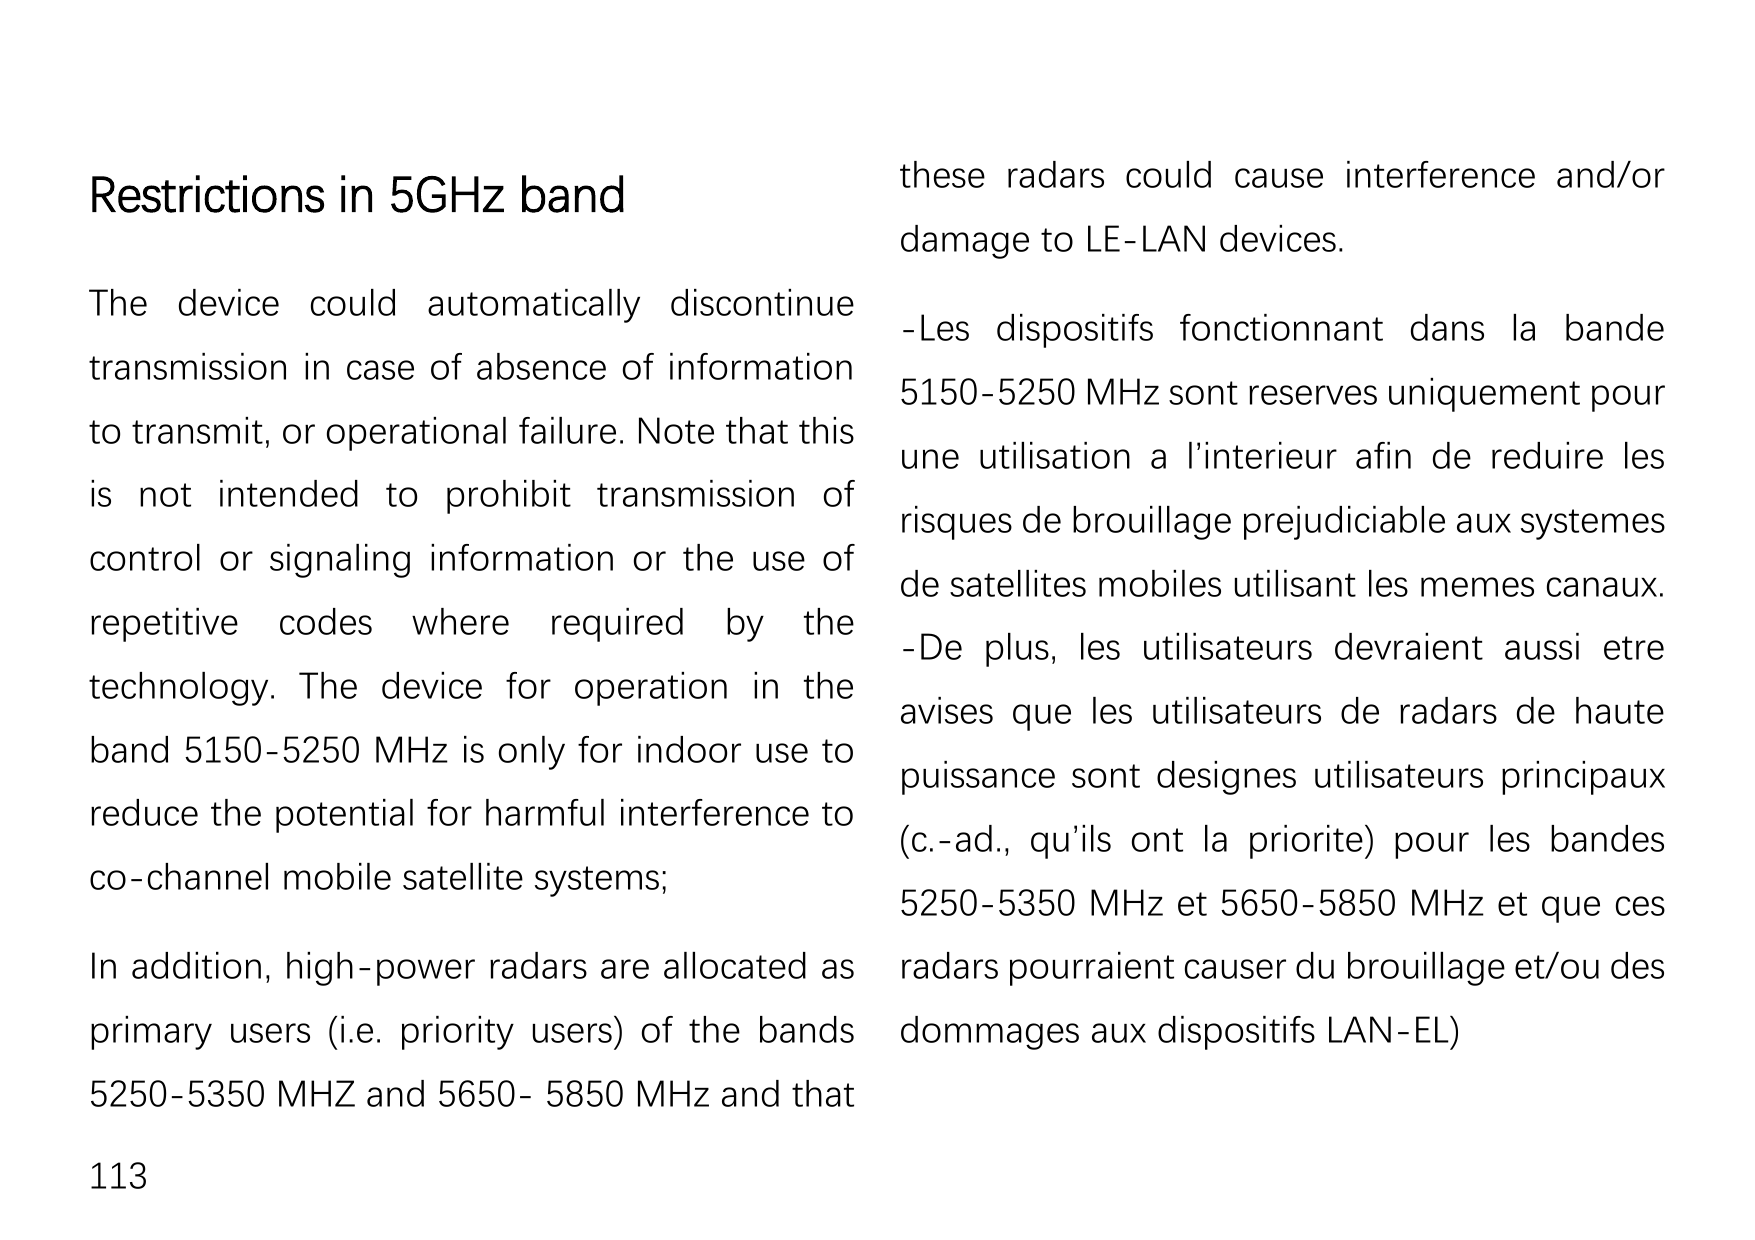 these radars could cause interference and/orRestrictions in 5GHz banddamage to LE-LAN devices.The device could automatically dis